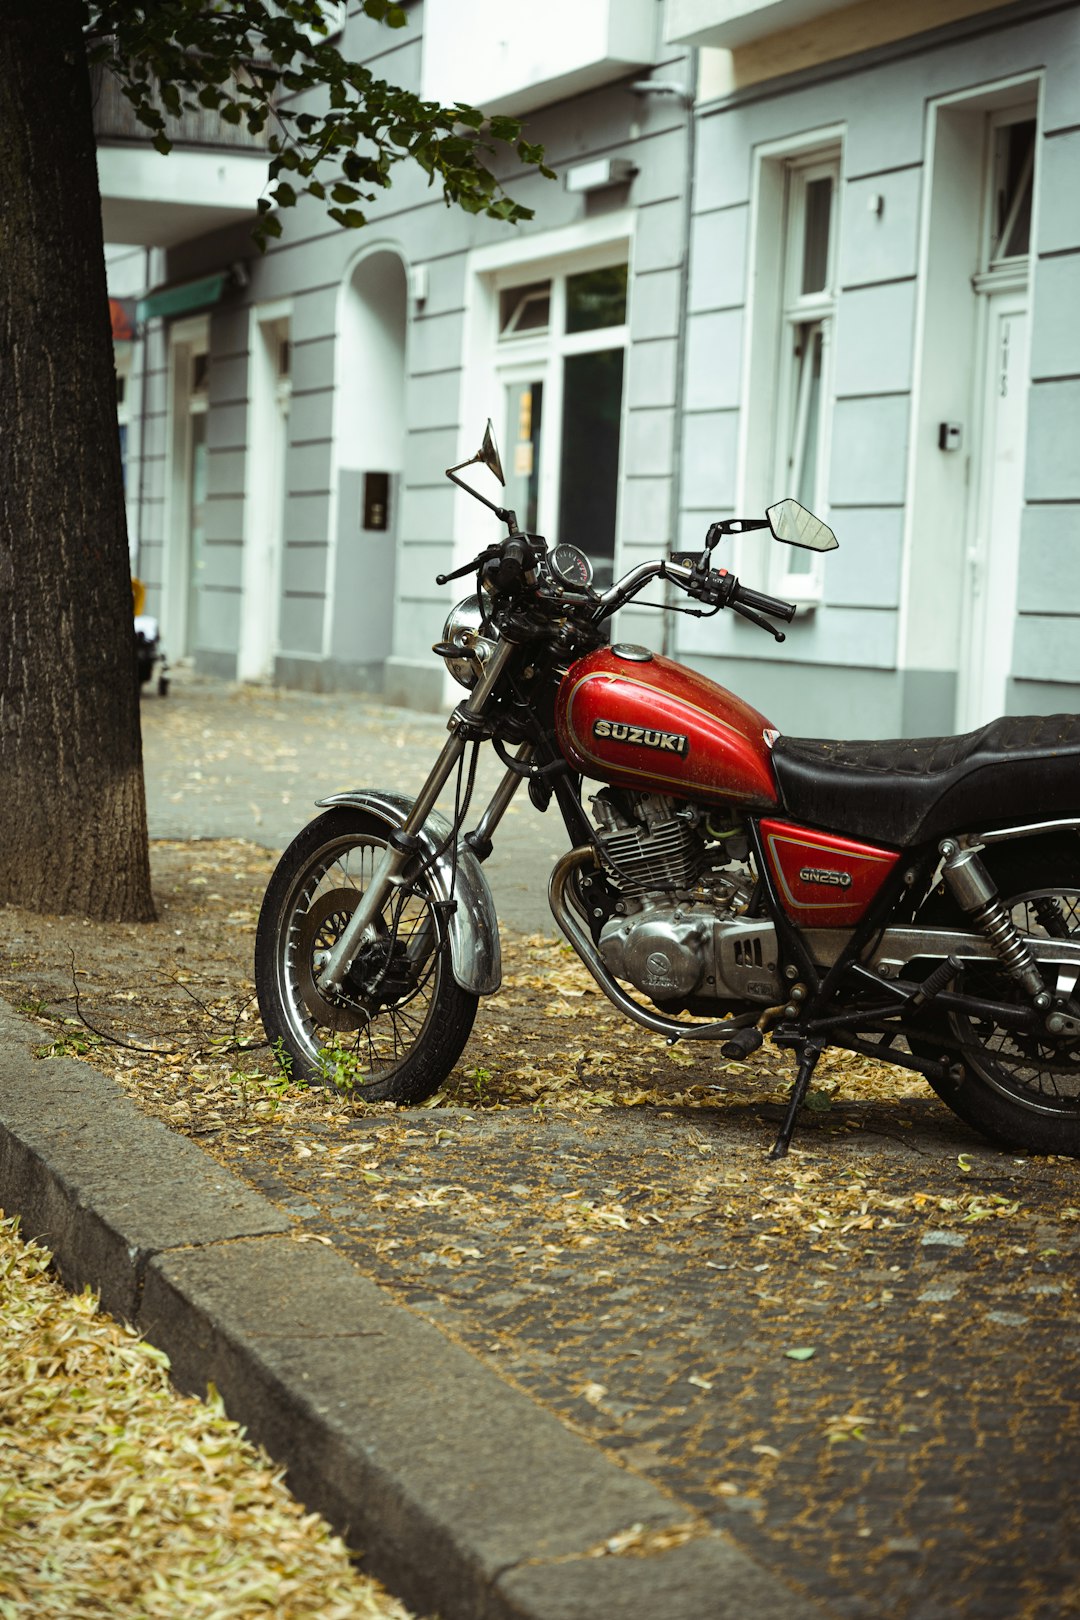 red and black standard motorcycle parked beside white wooden door